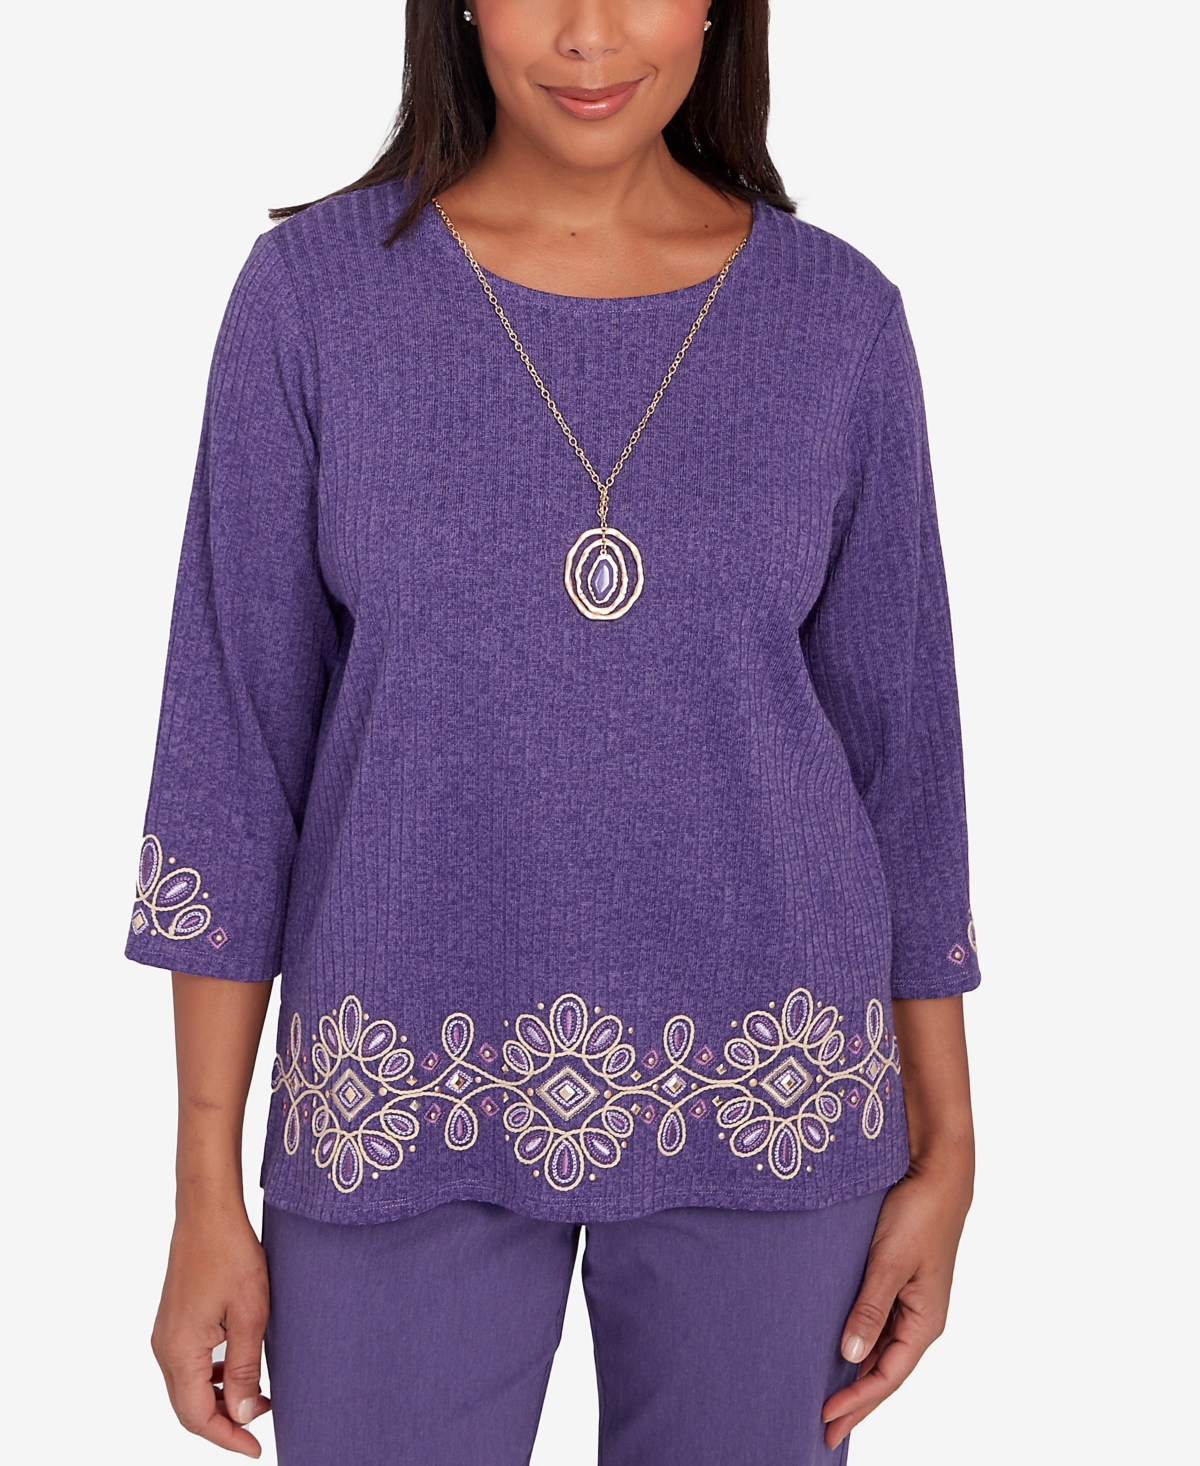 Petite Charm School Embroidered Medallion Necklace Top - Iris